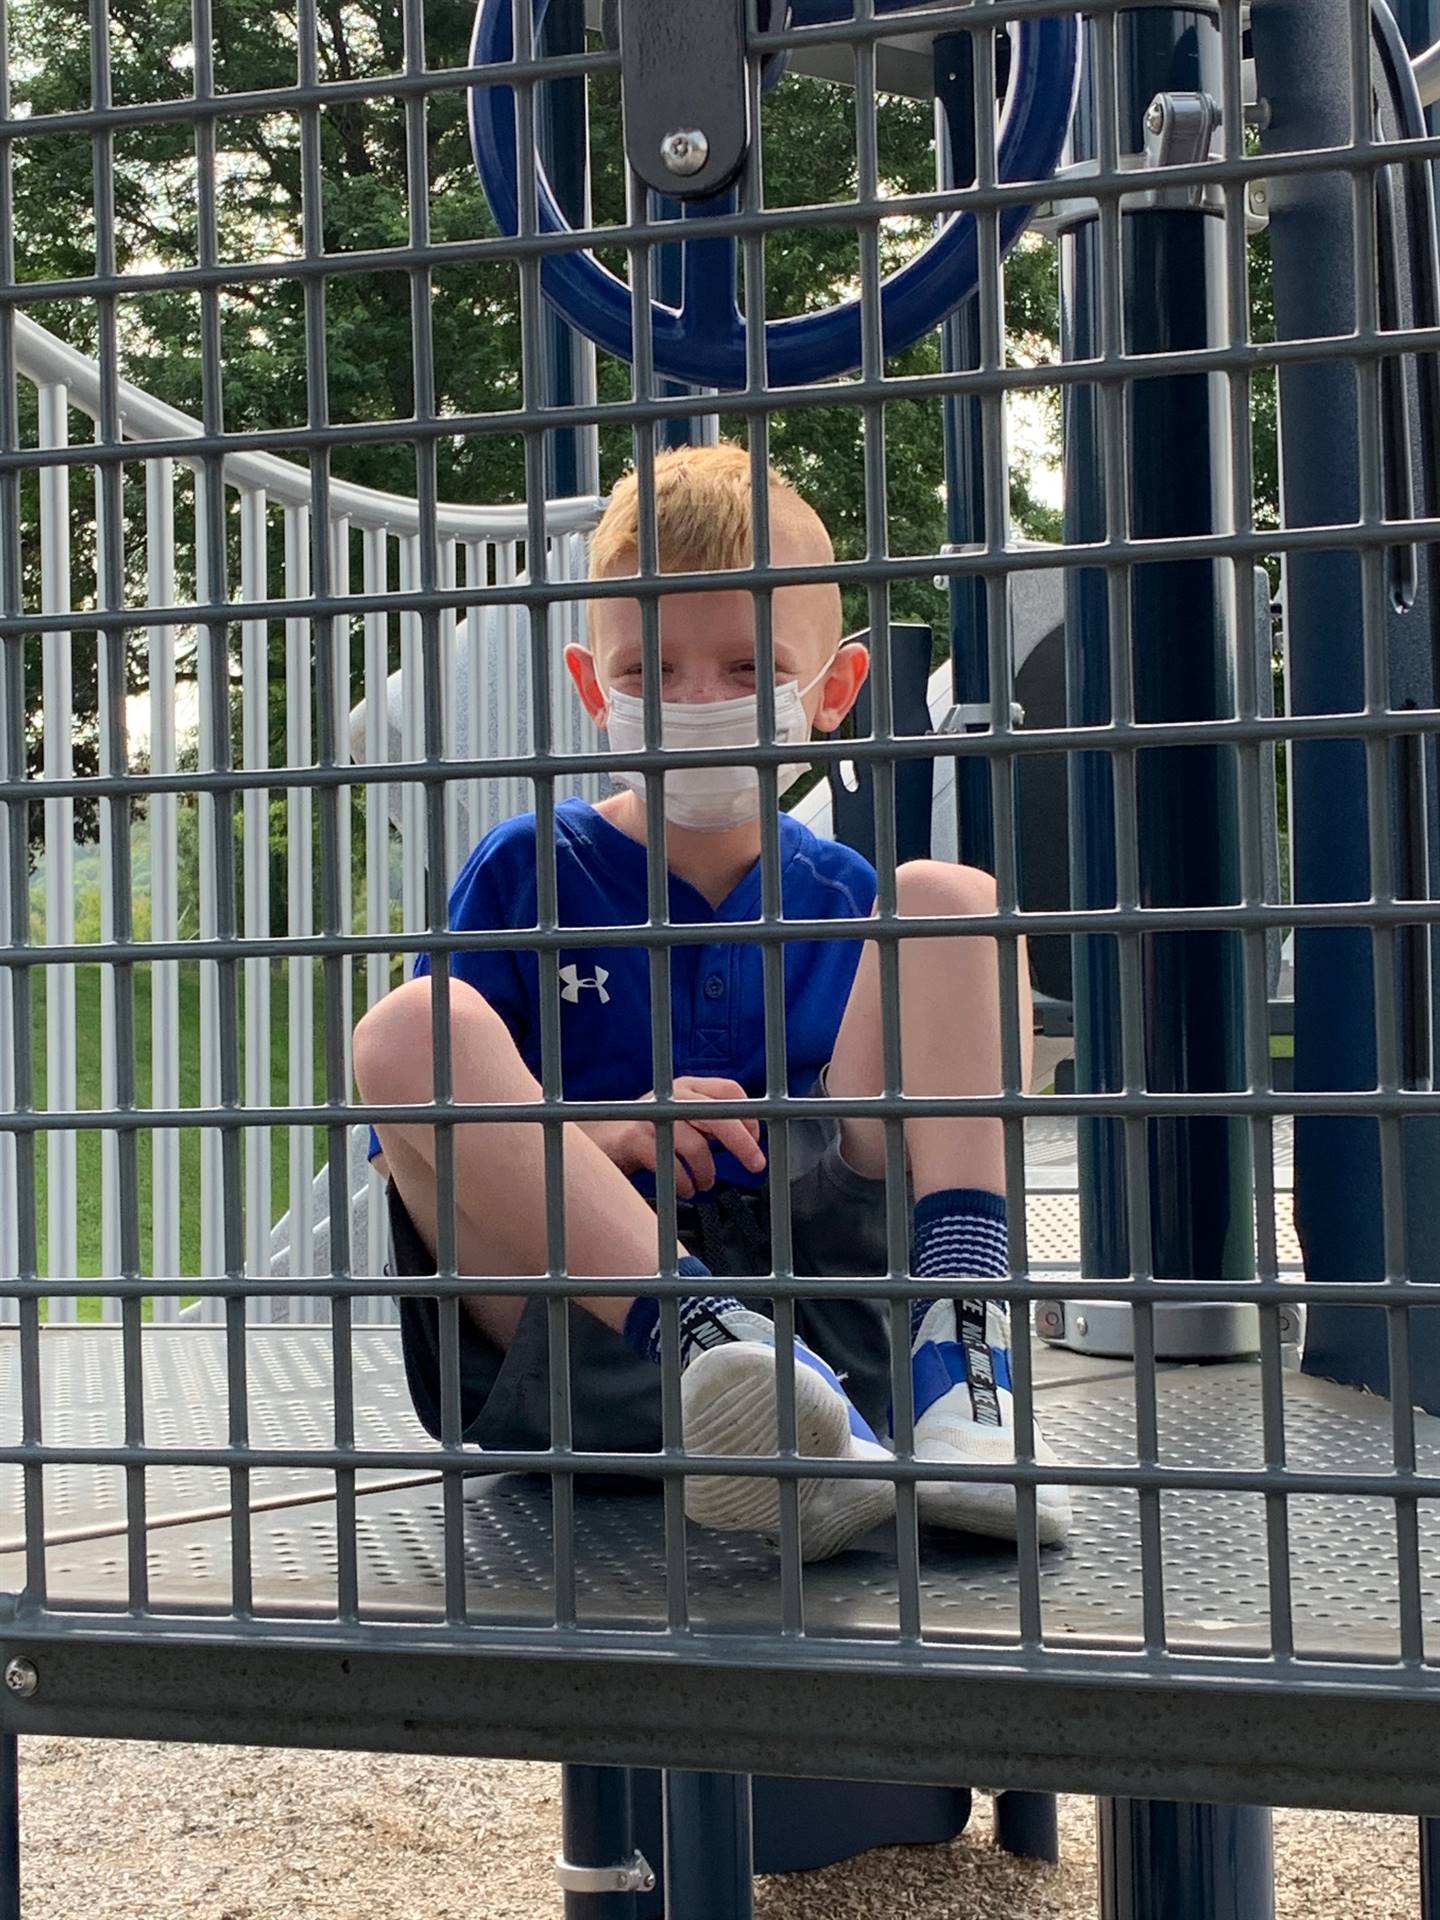 a student peeks out from behind playground bars